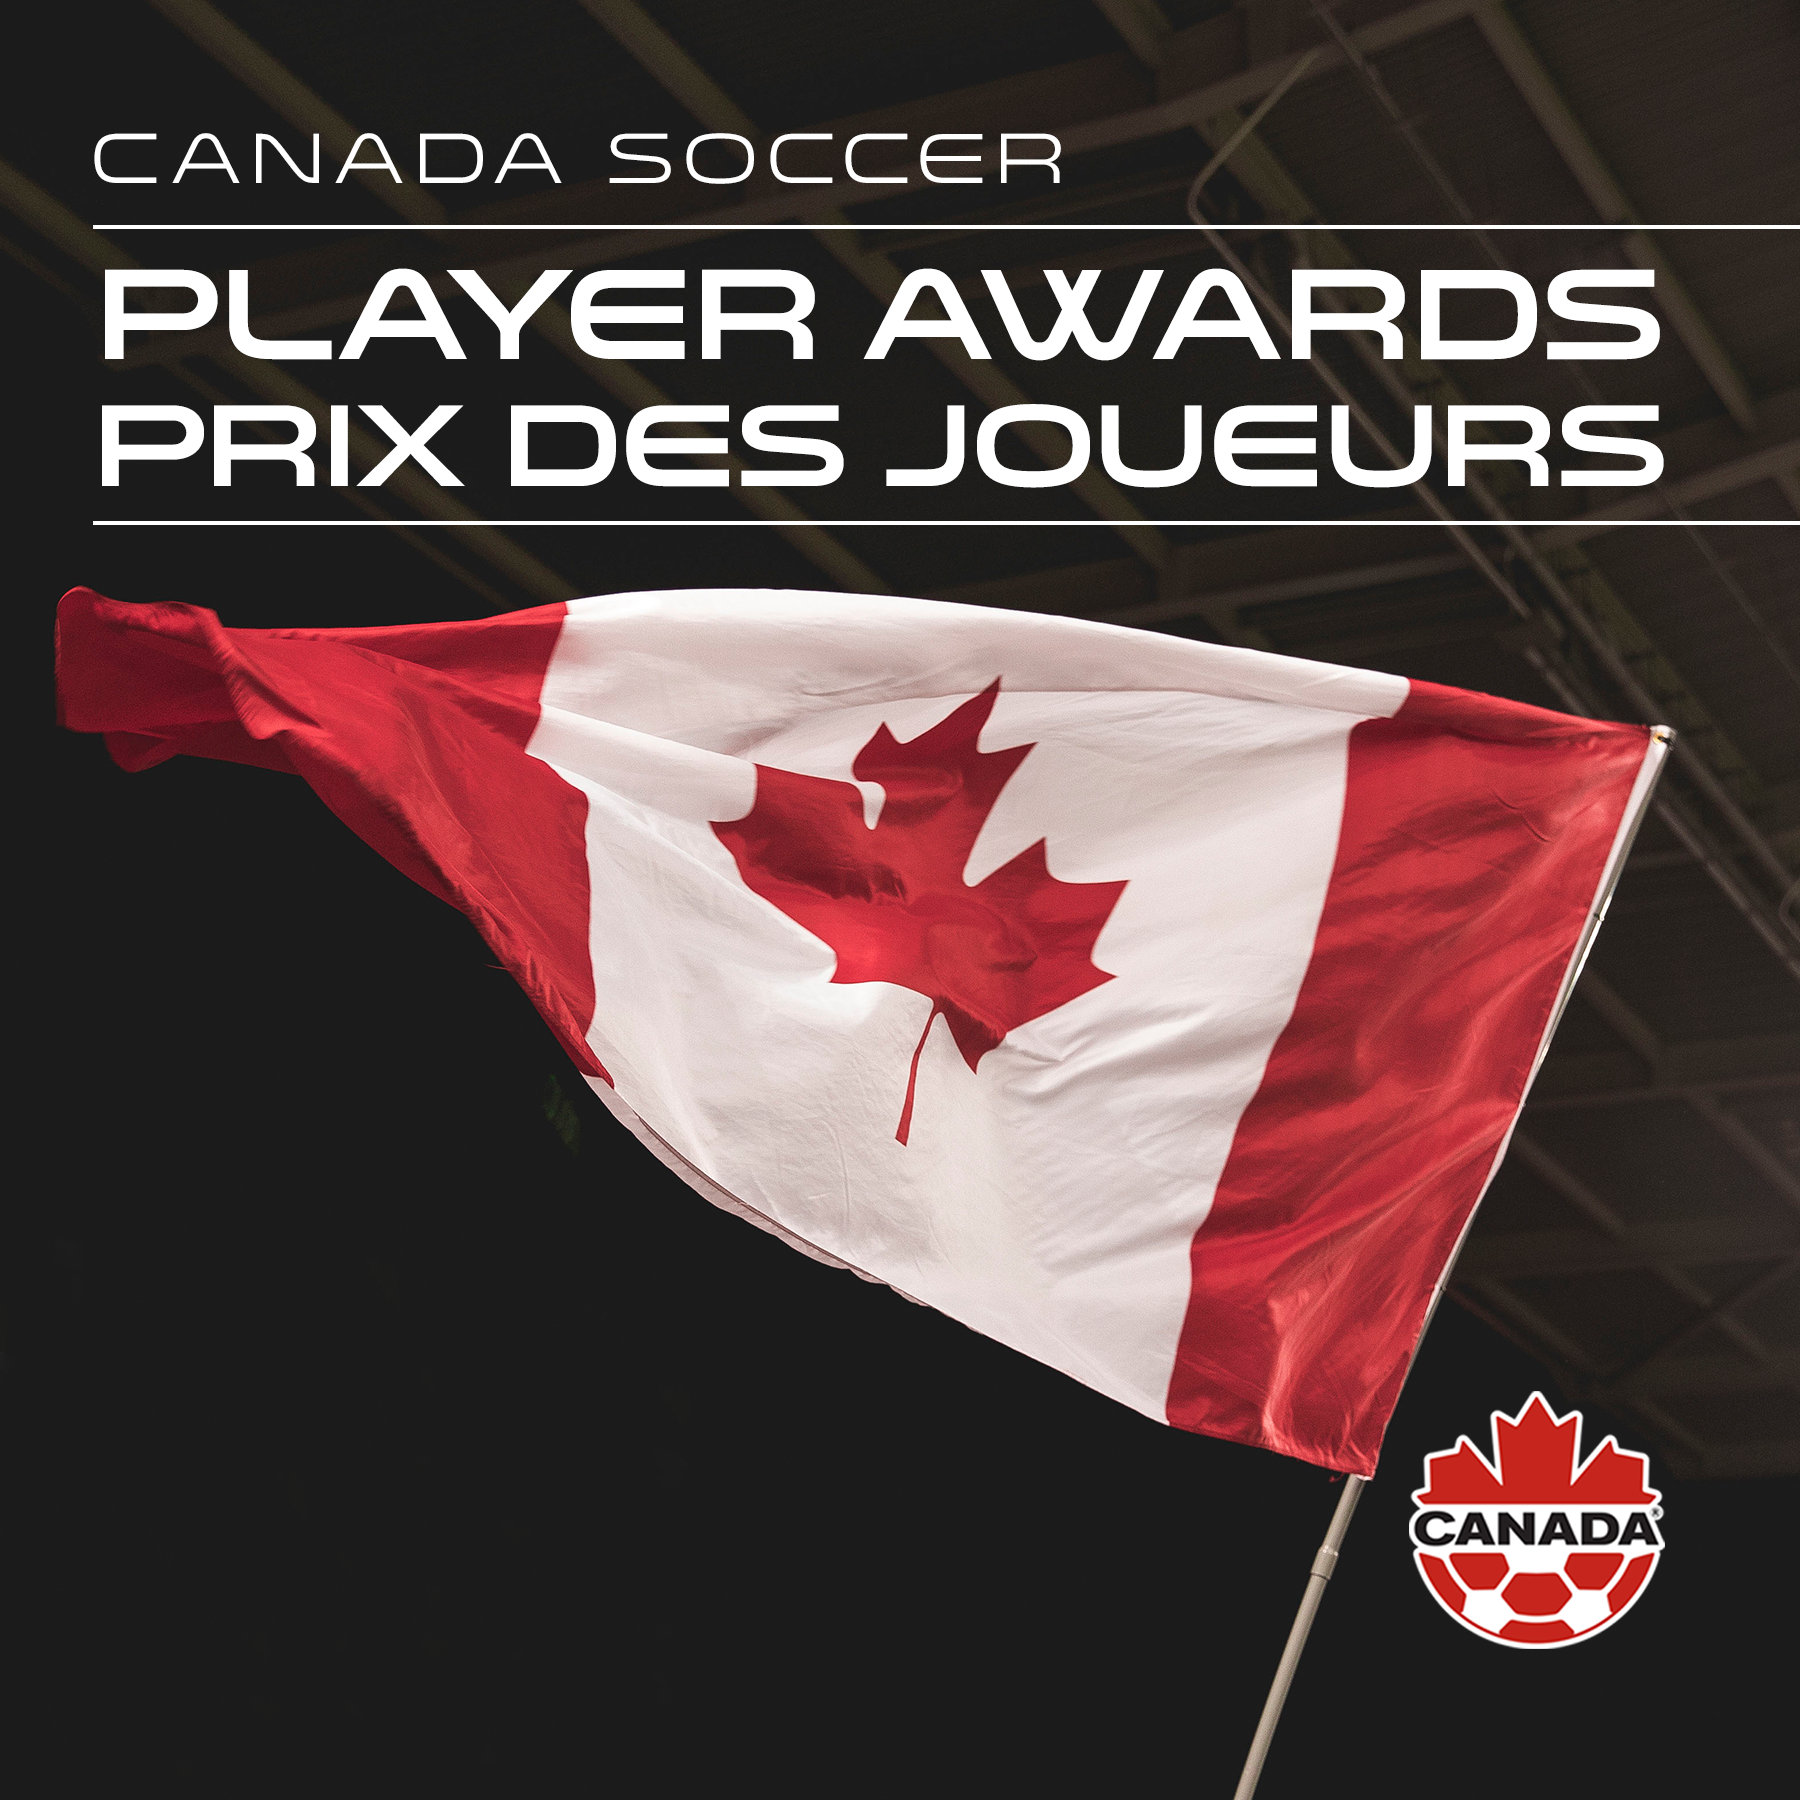 Canada Soccer Para Soccer Player of the Year